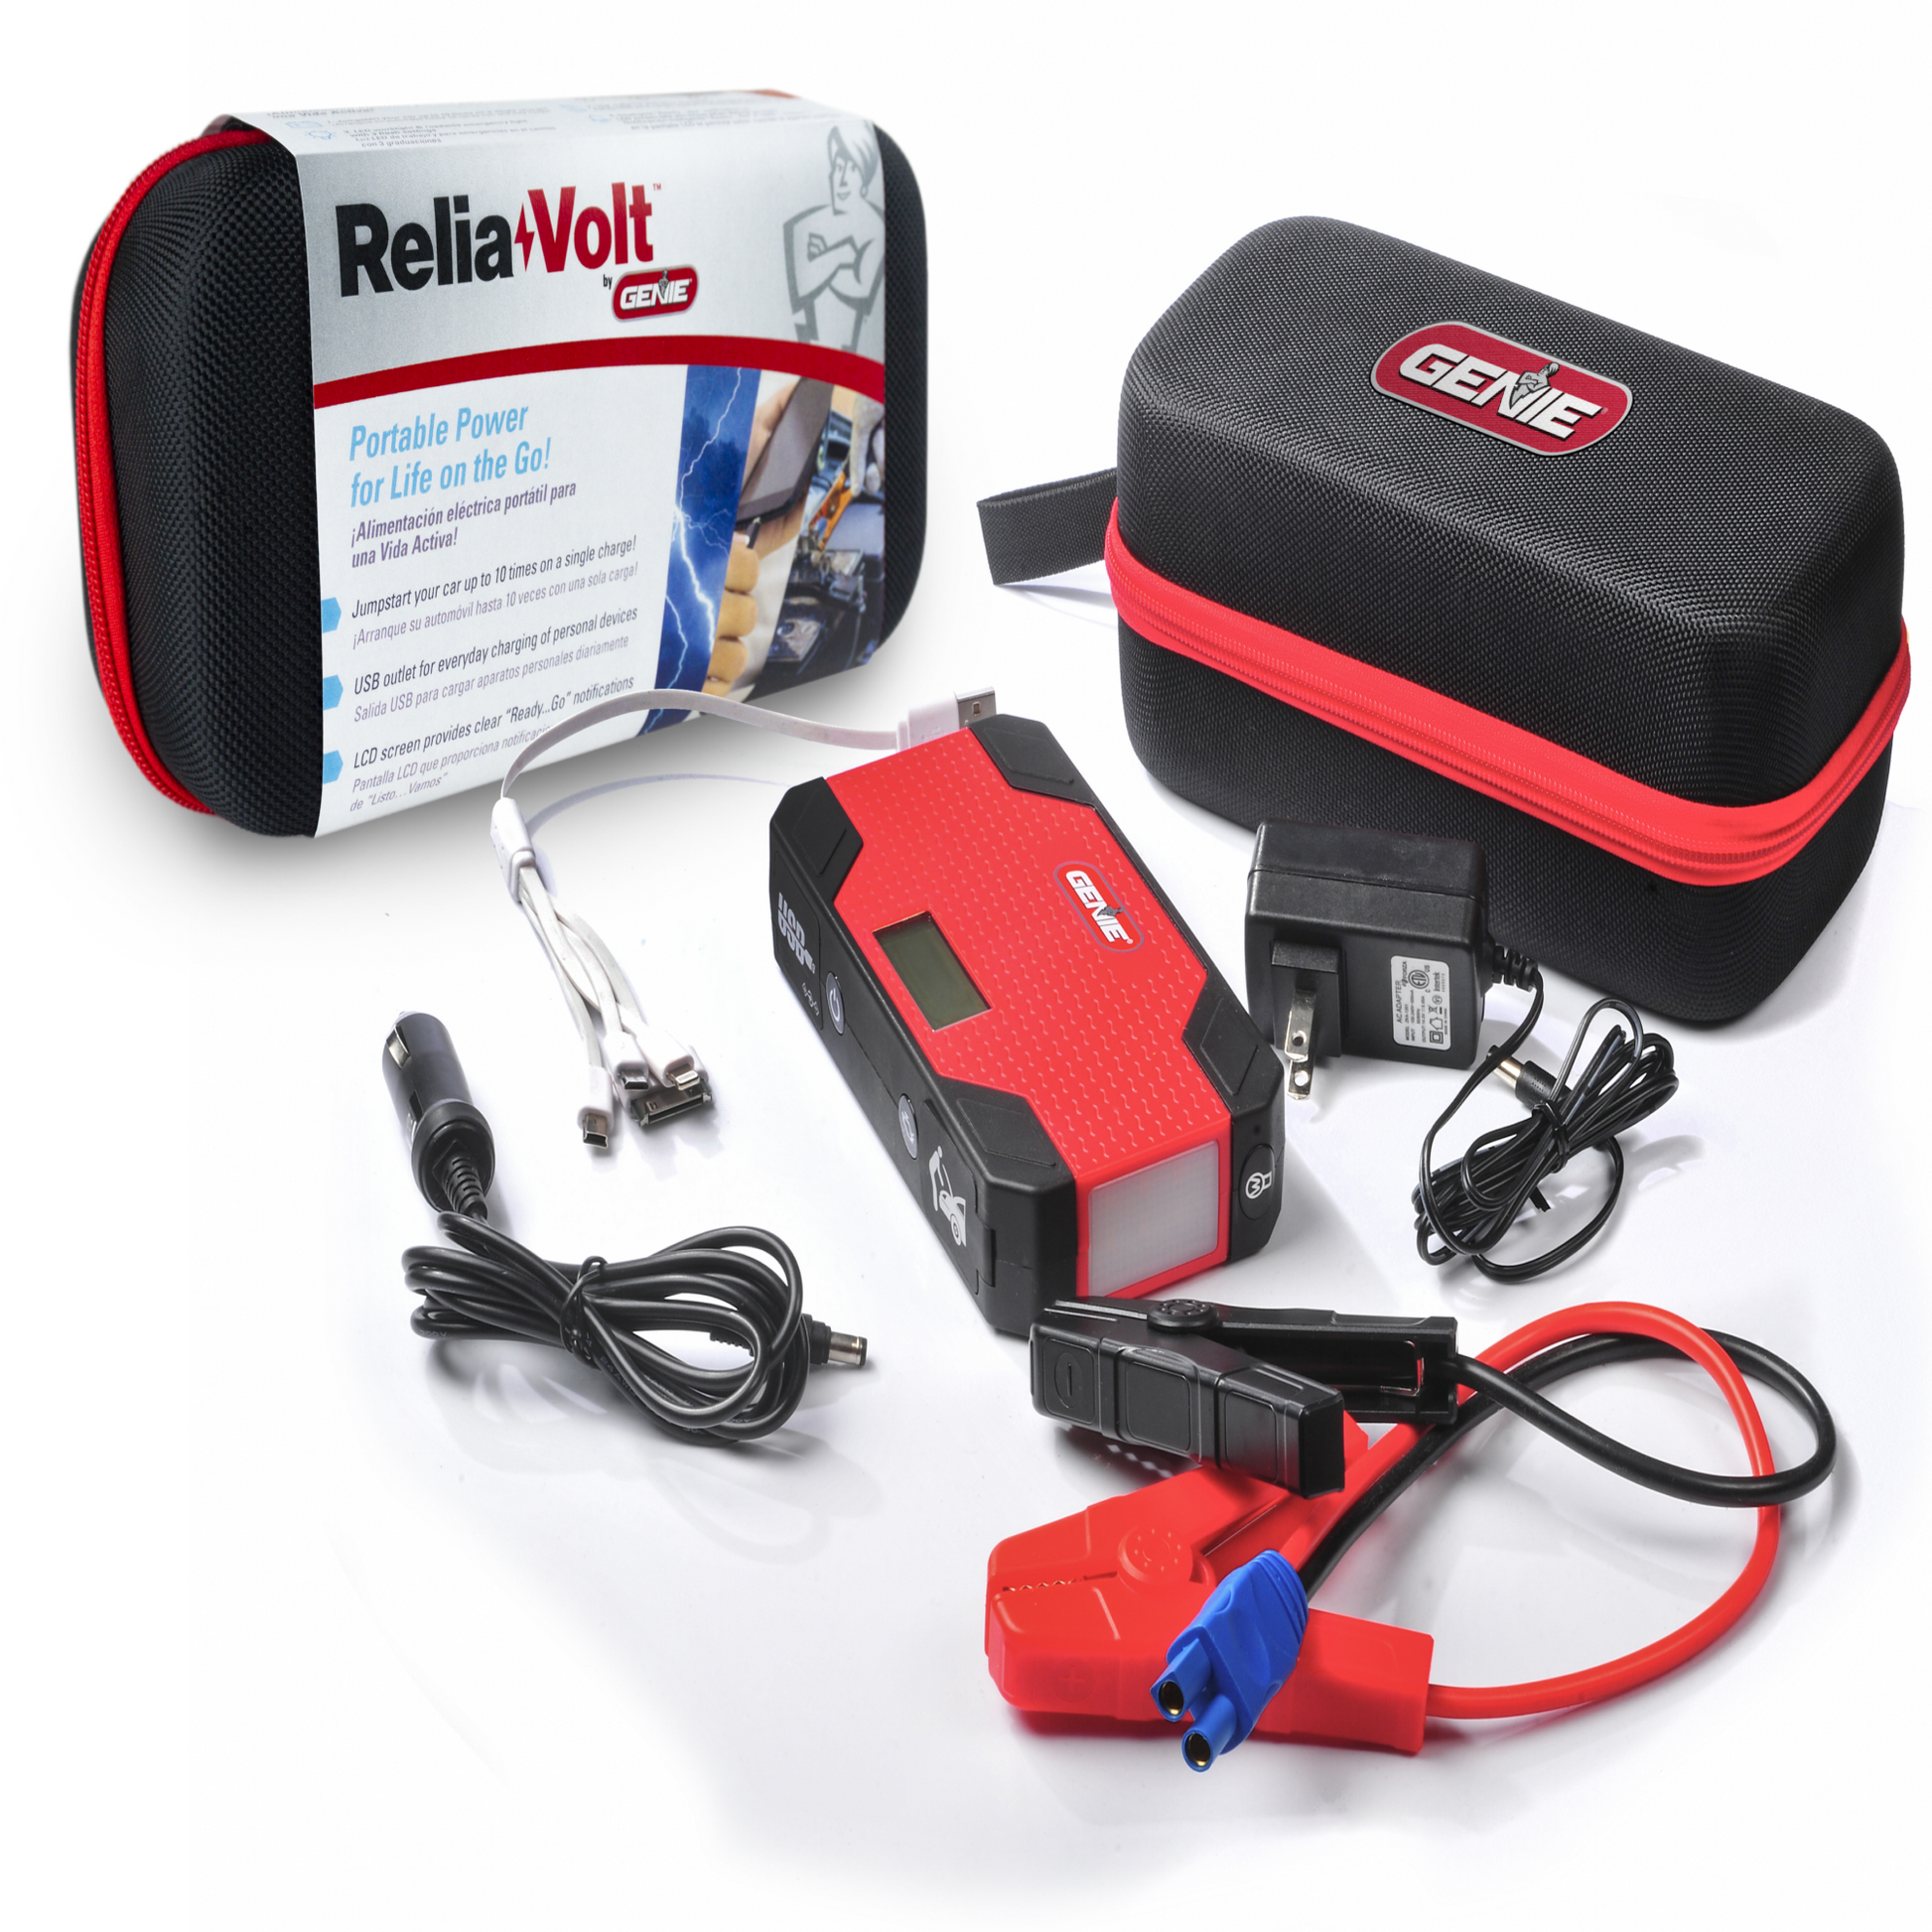 ReliaVolt Portable Jump Starter and charger includes charger, jumper cables, multi charger plug, charge adapter, flashlight